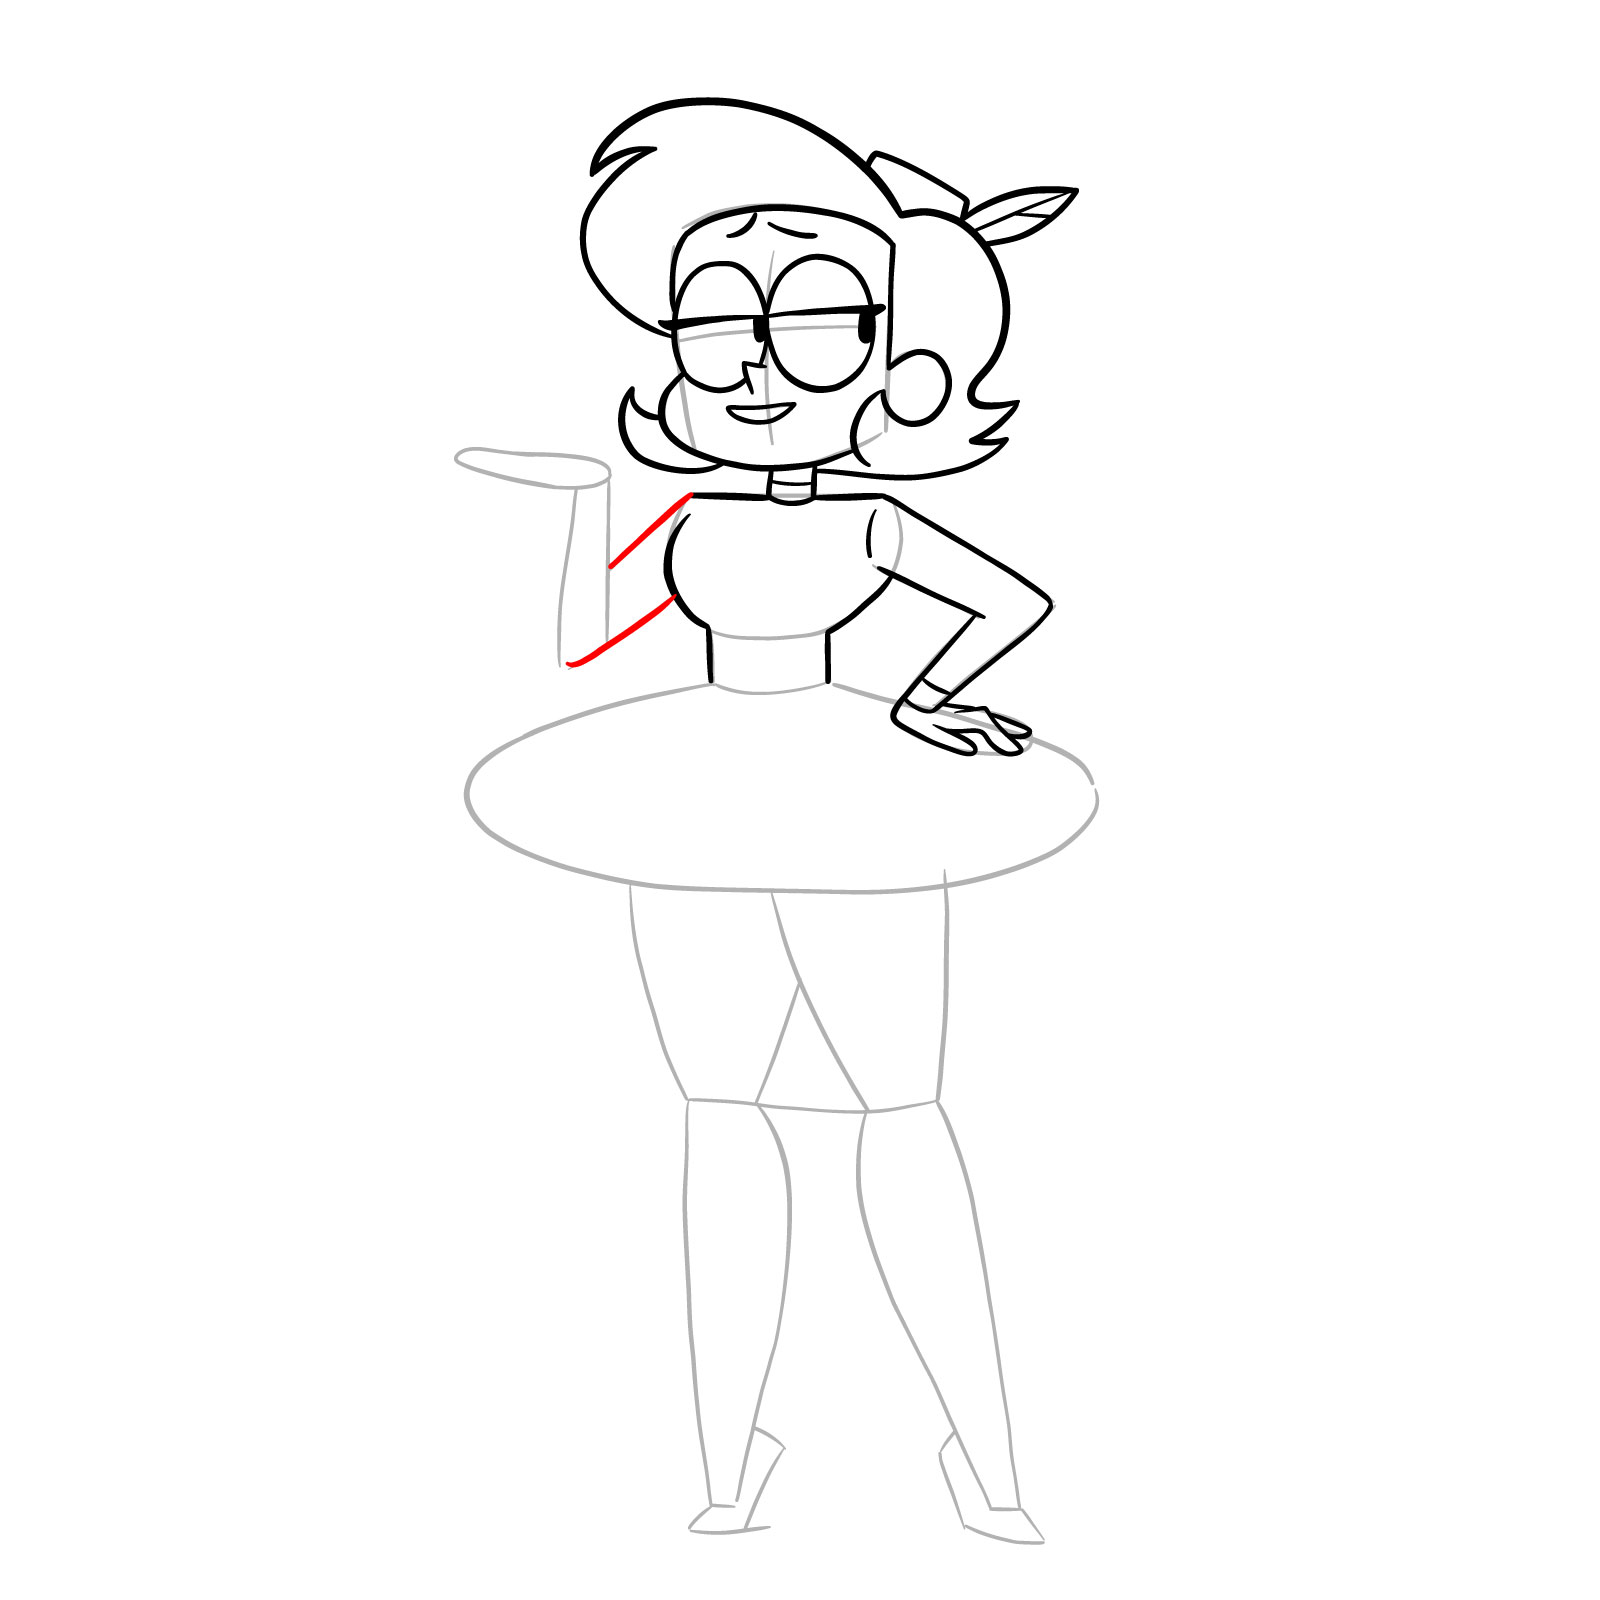 How to draw Elodie from OK K.O.! - step 21